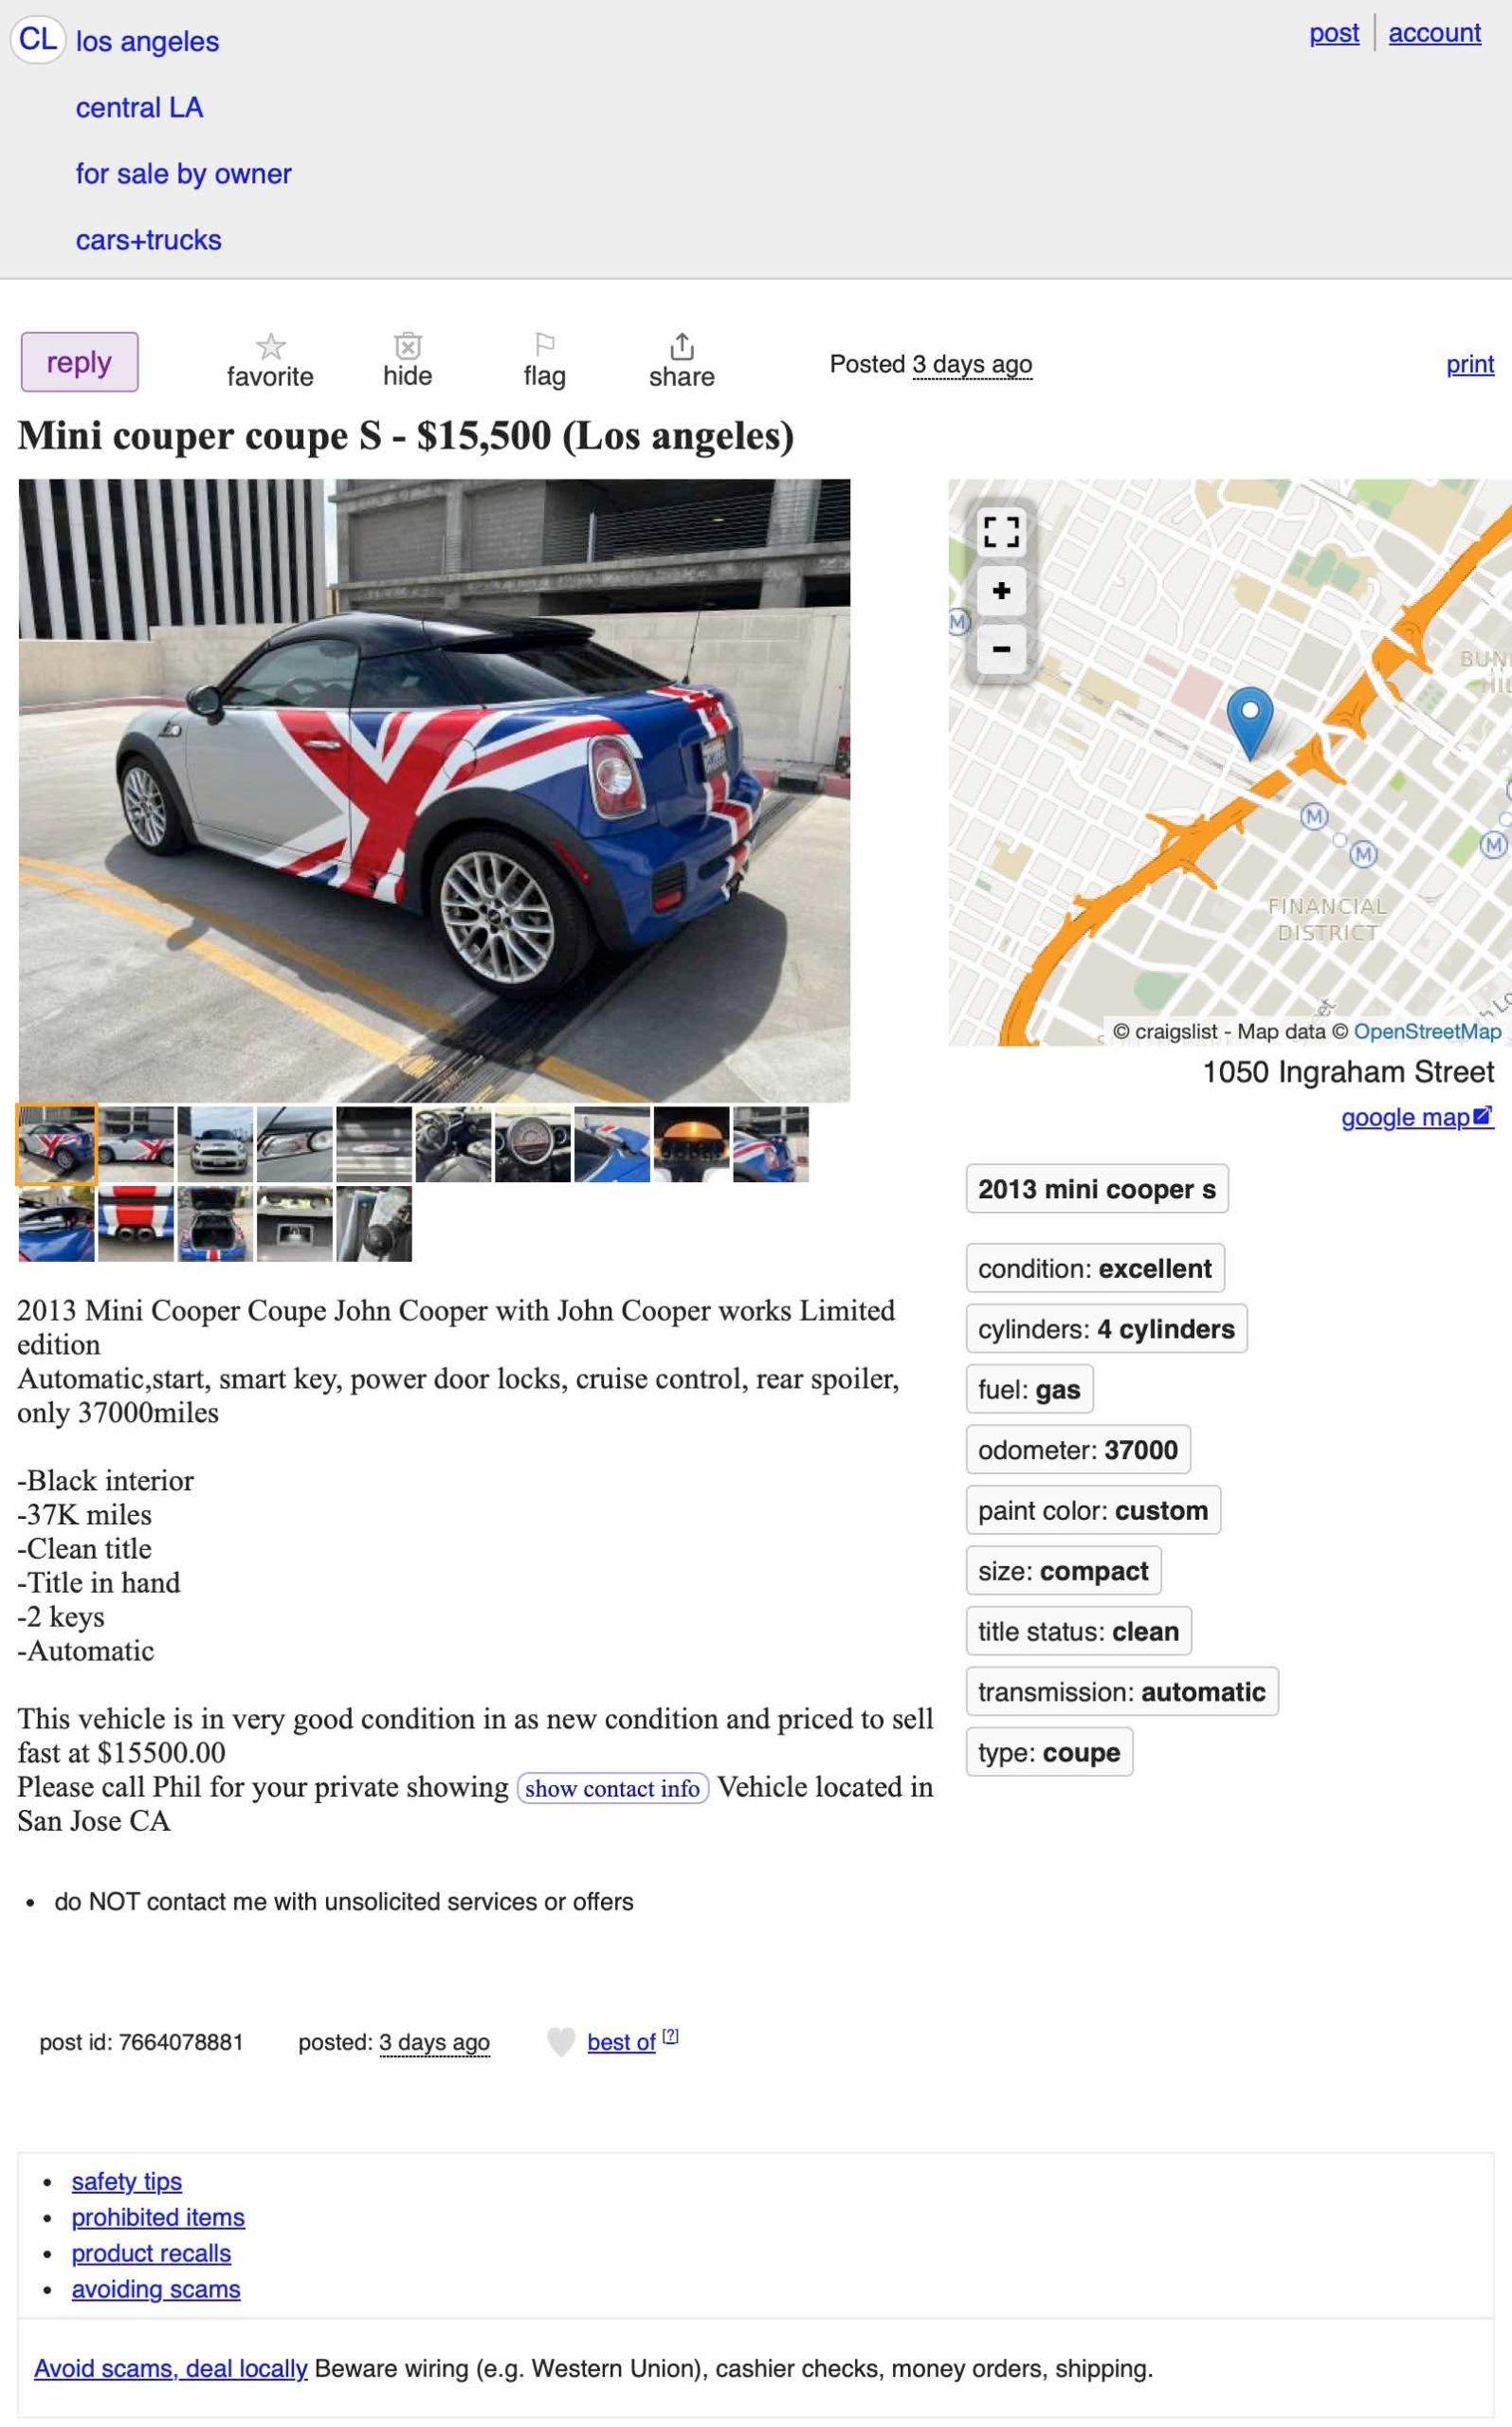 at $15,500, could this 2013 mini cooper s coupe be a big deal?